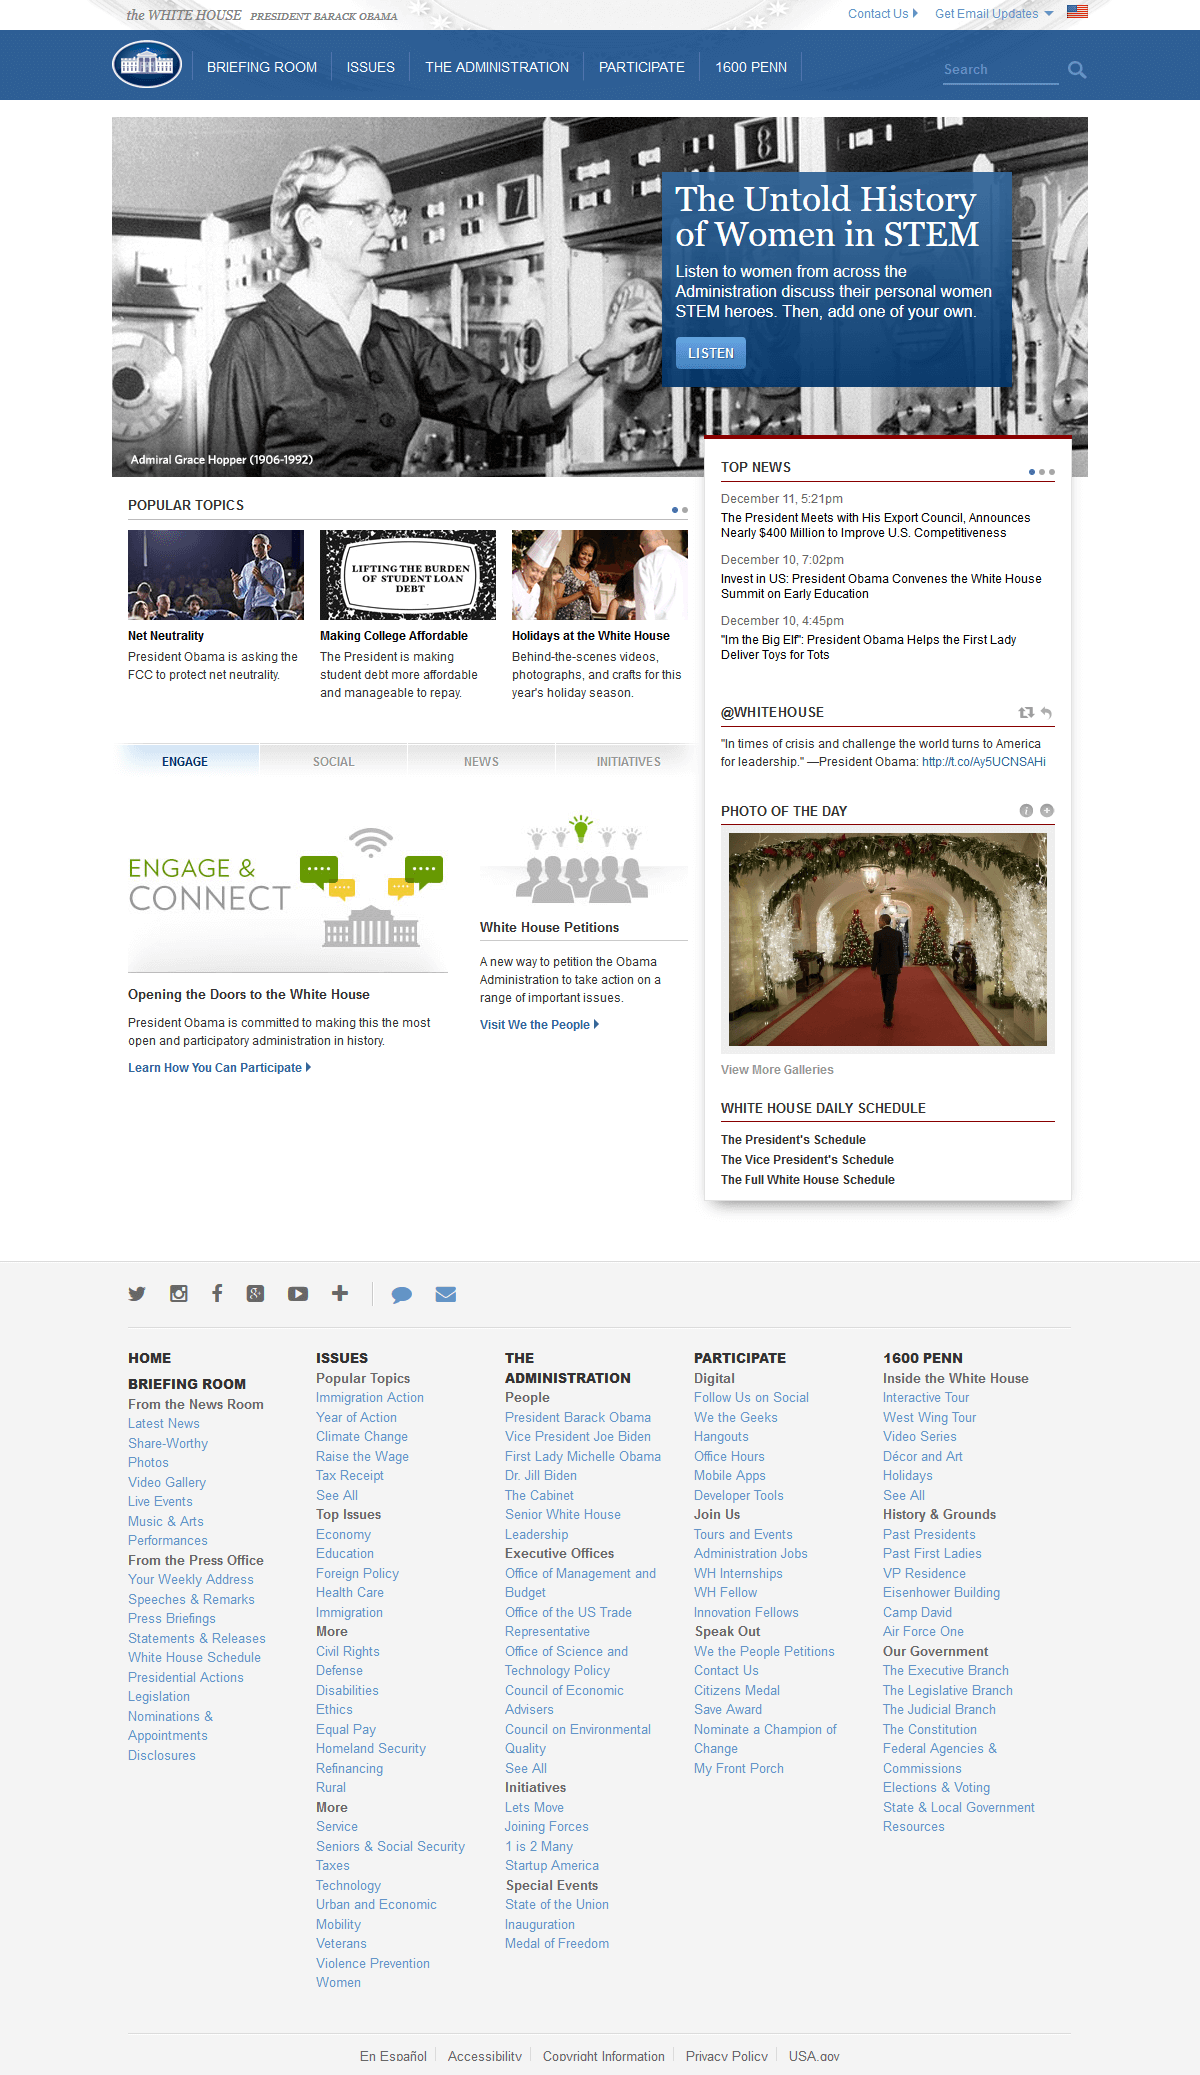 The White House website in 2014